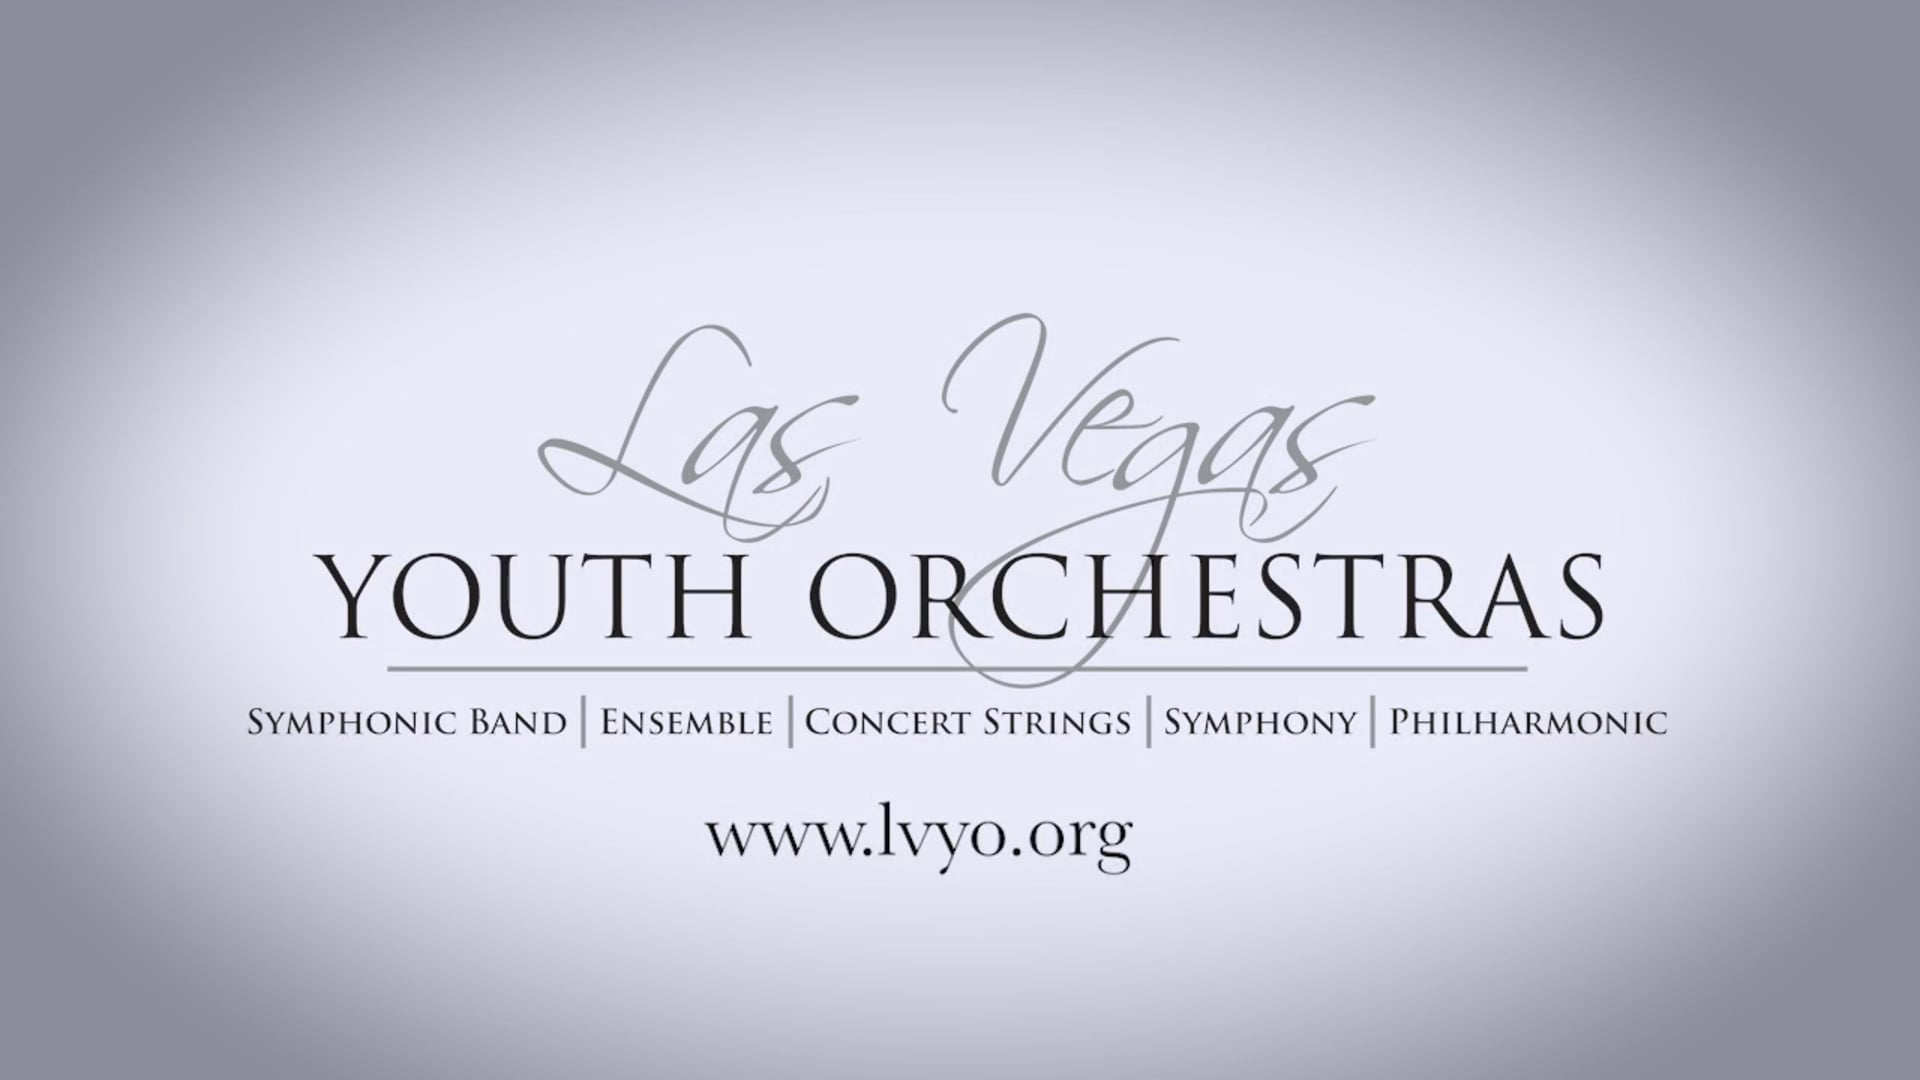 Las Vegas Youth Orchestras